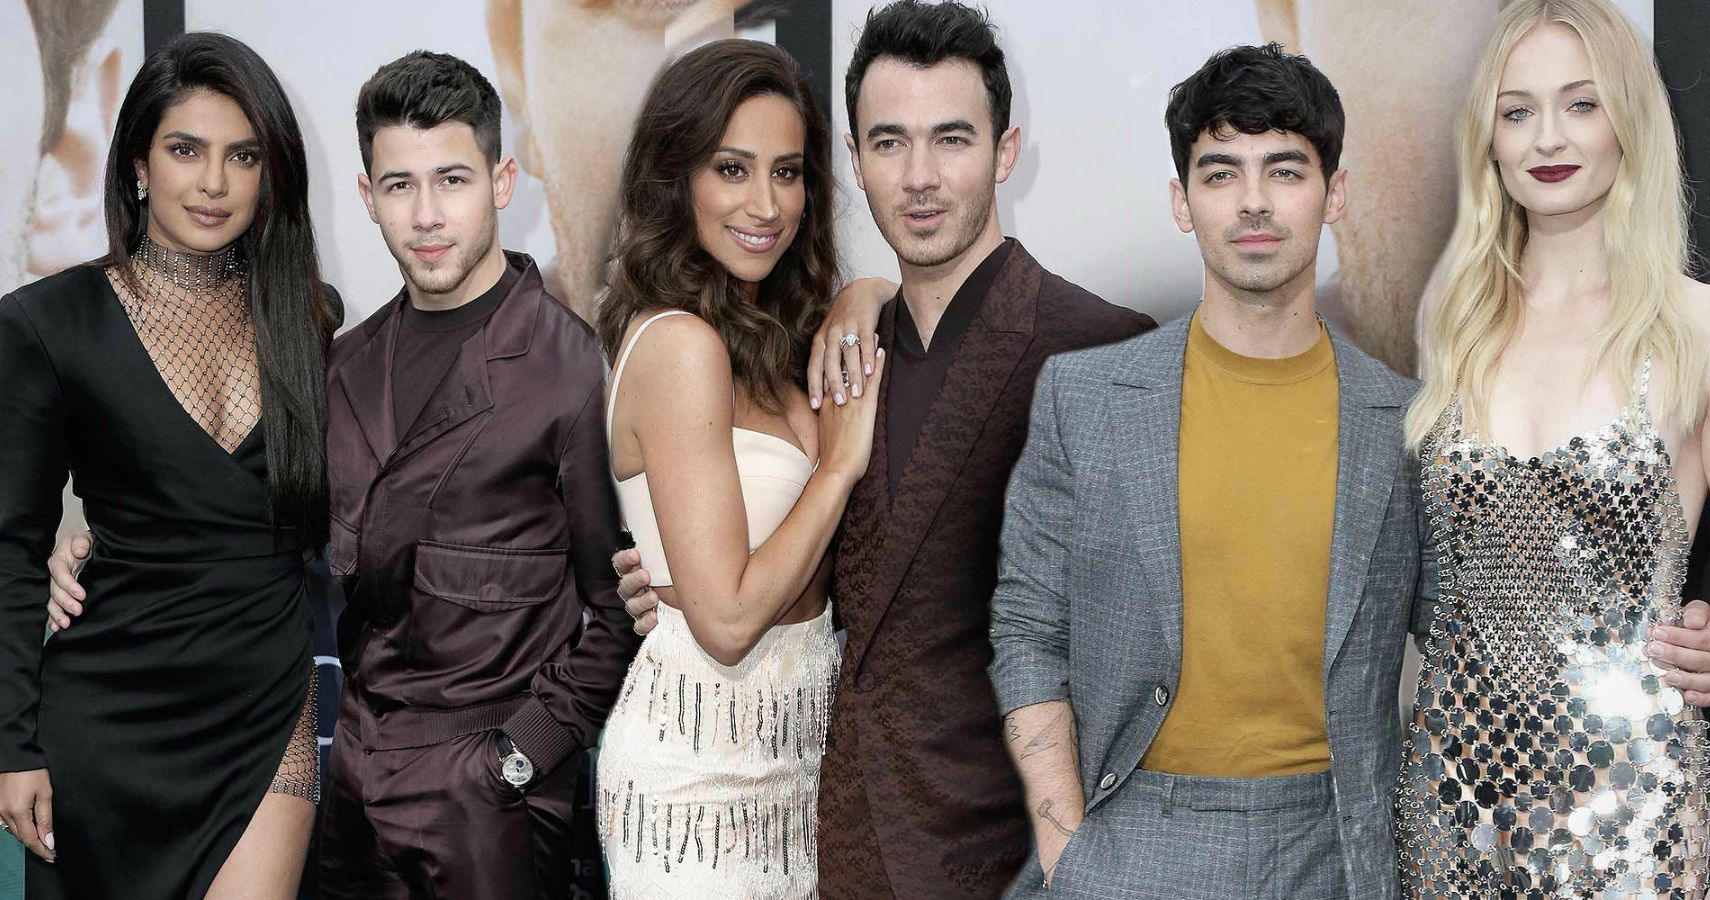 Jonas Brothers Explain Why They Include Their Wives In Their Music Video